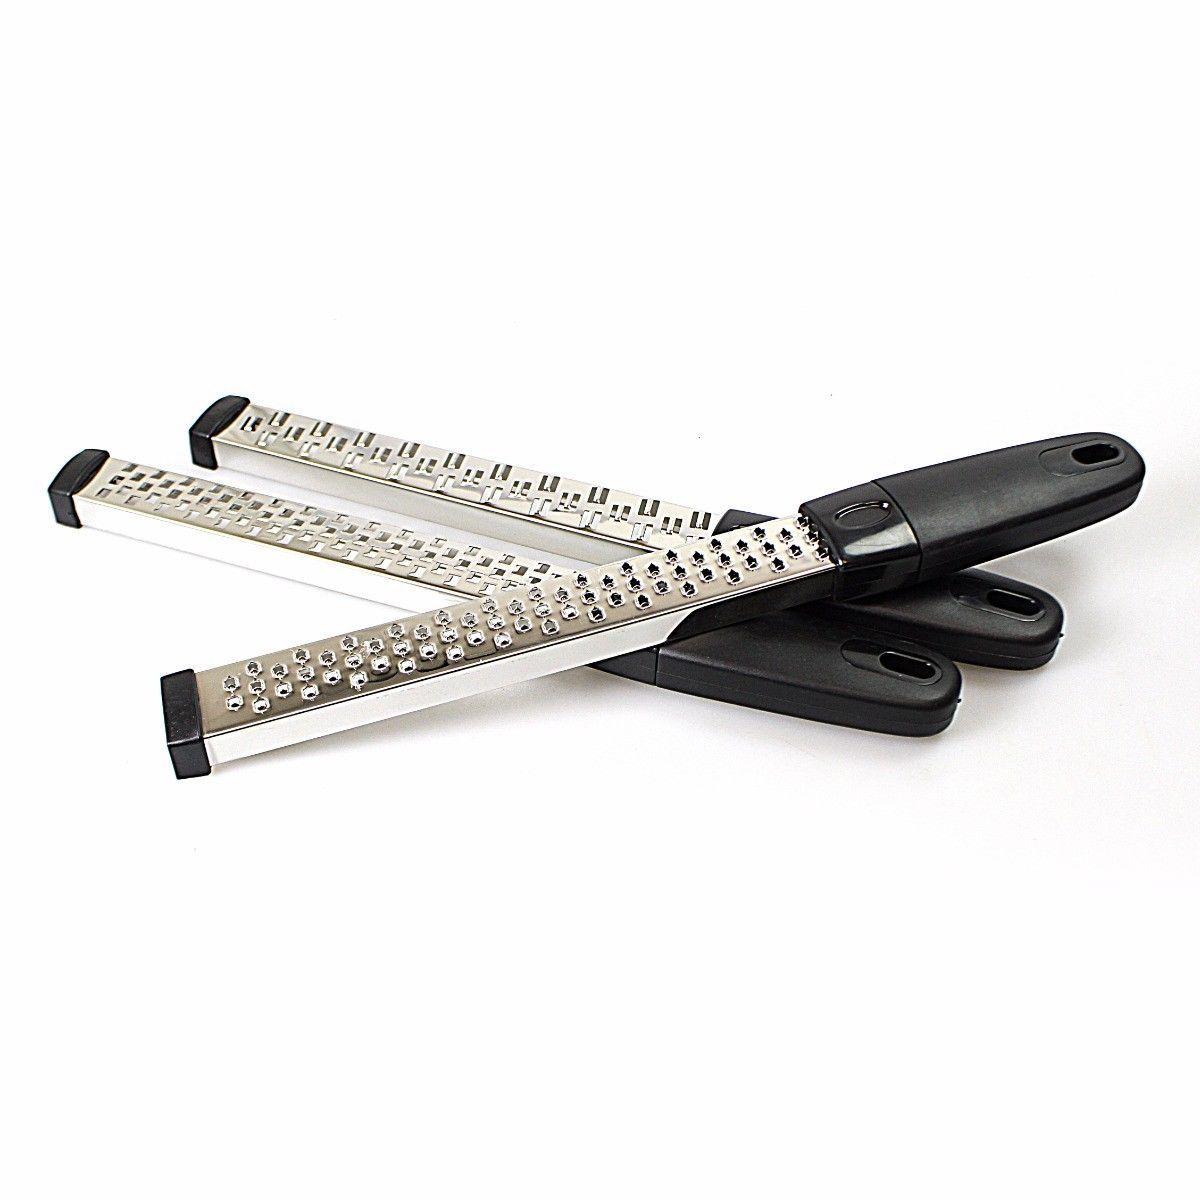 3 Stainless Steel PC Flat Hand Zesting Graters From Fine To Coarse 1502 (Parcel Rate)